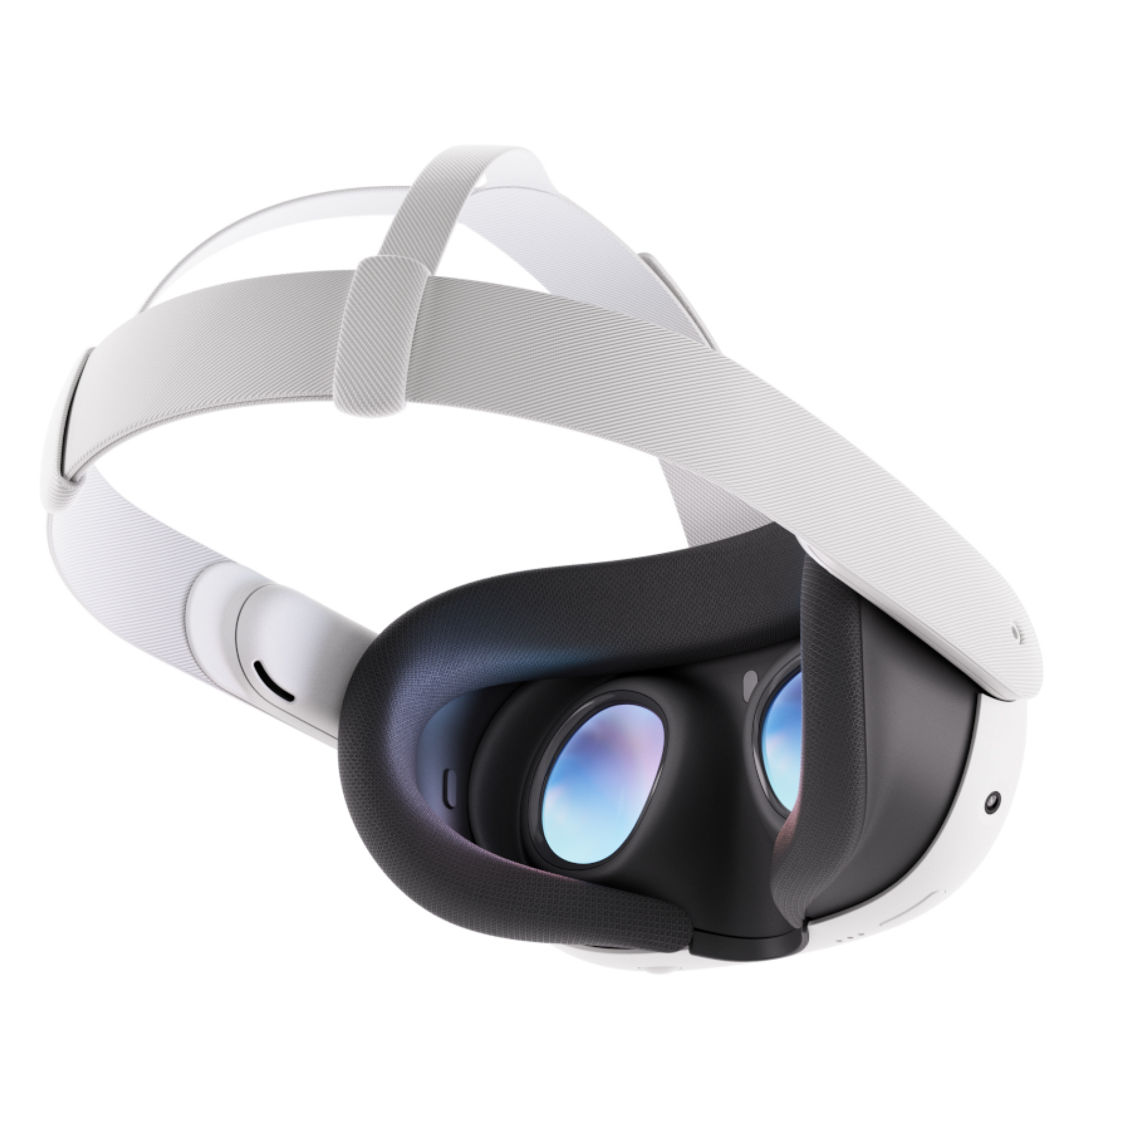 Meta Quest 3 512GB VR Headset - Image 2 of 3